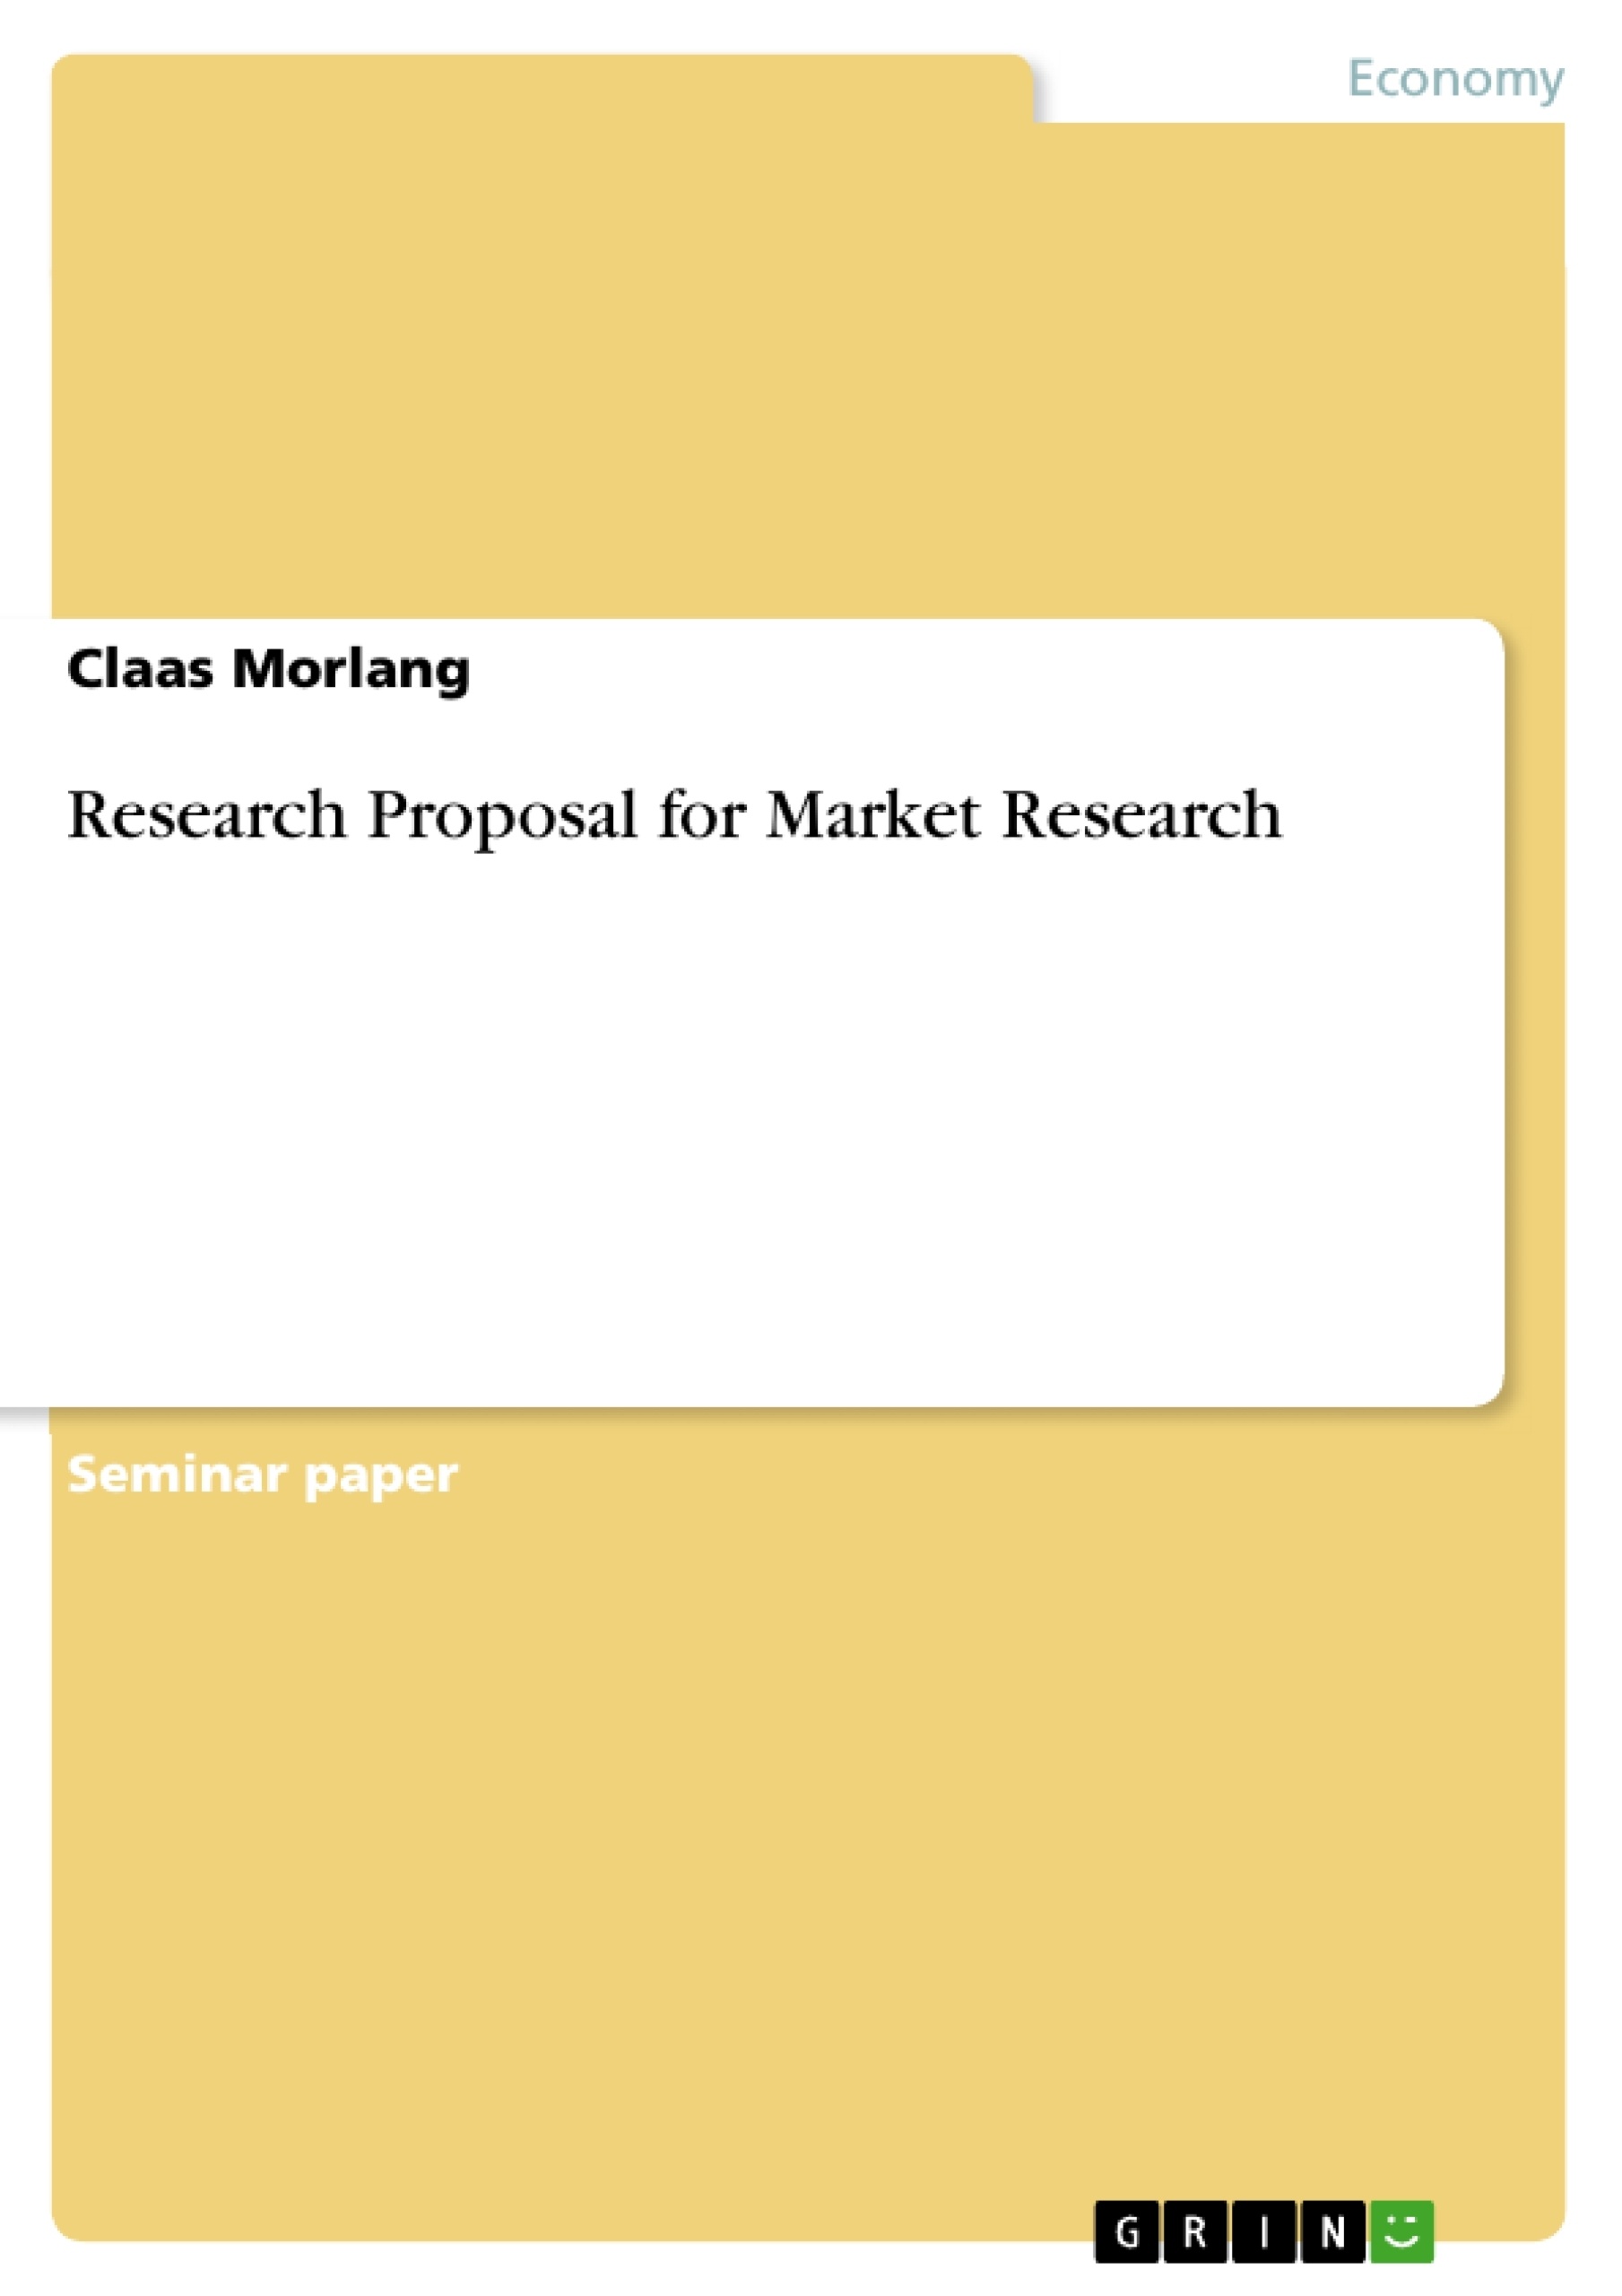 dissertations on marketing research